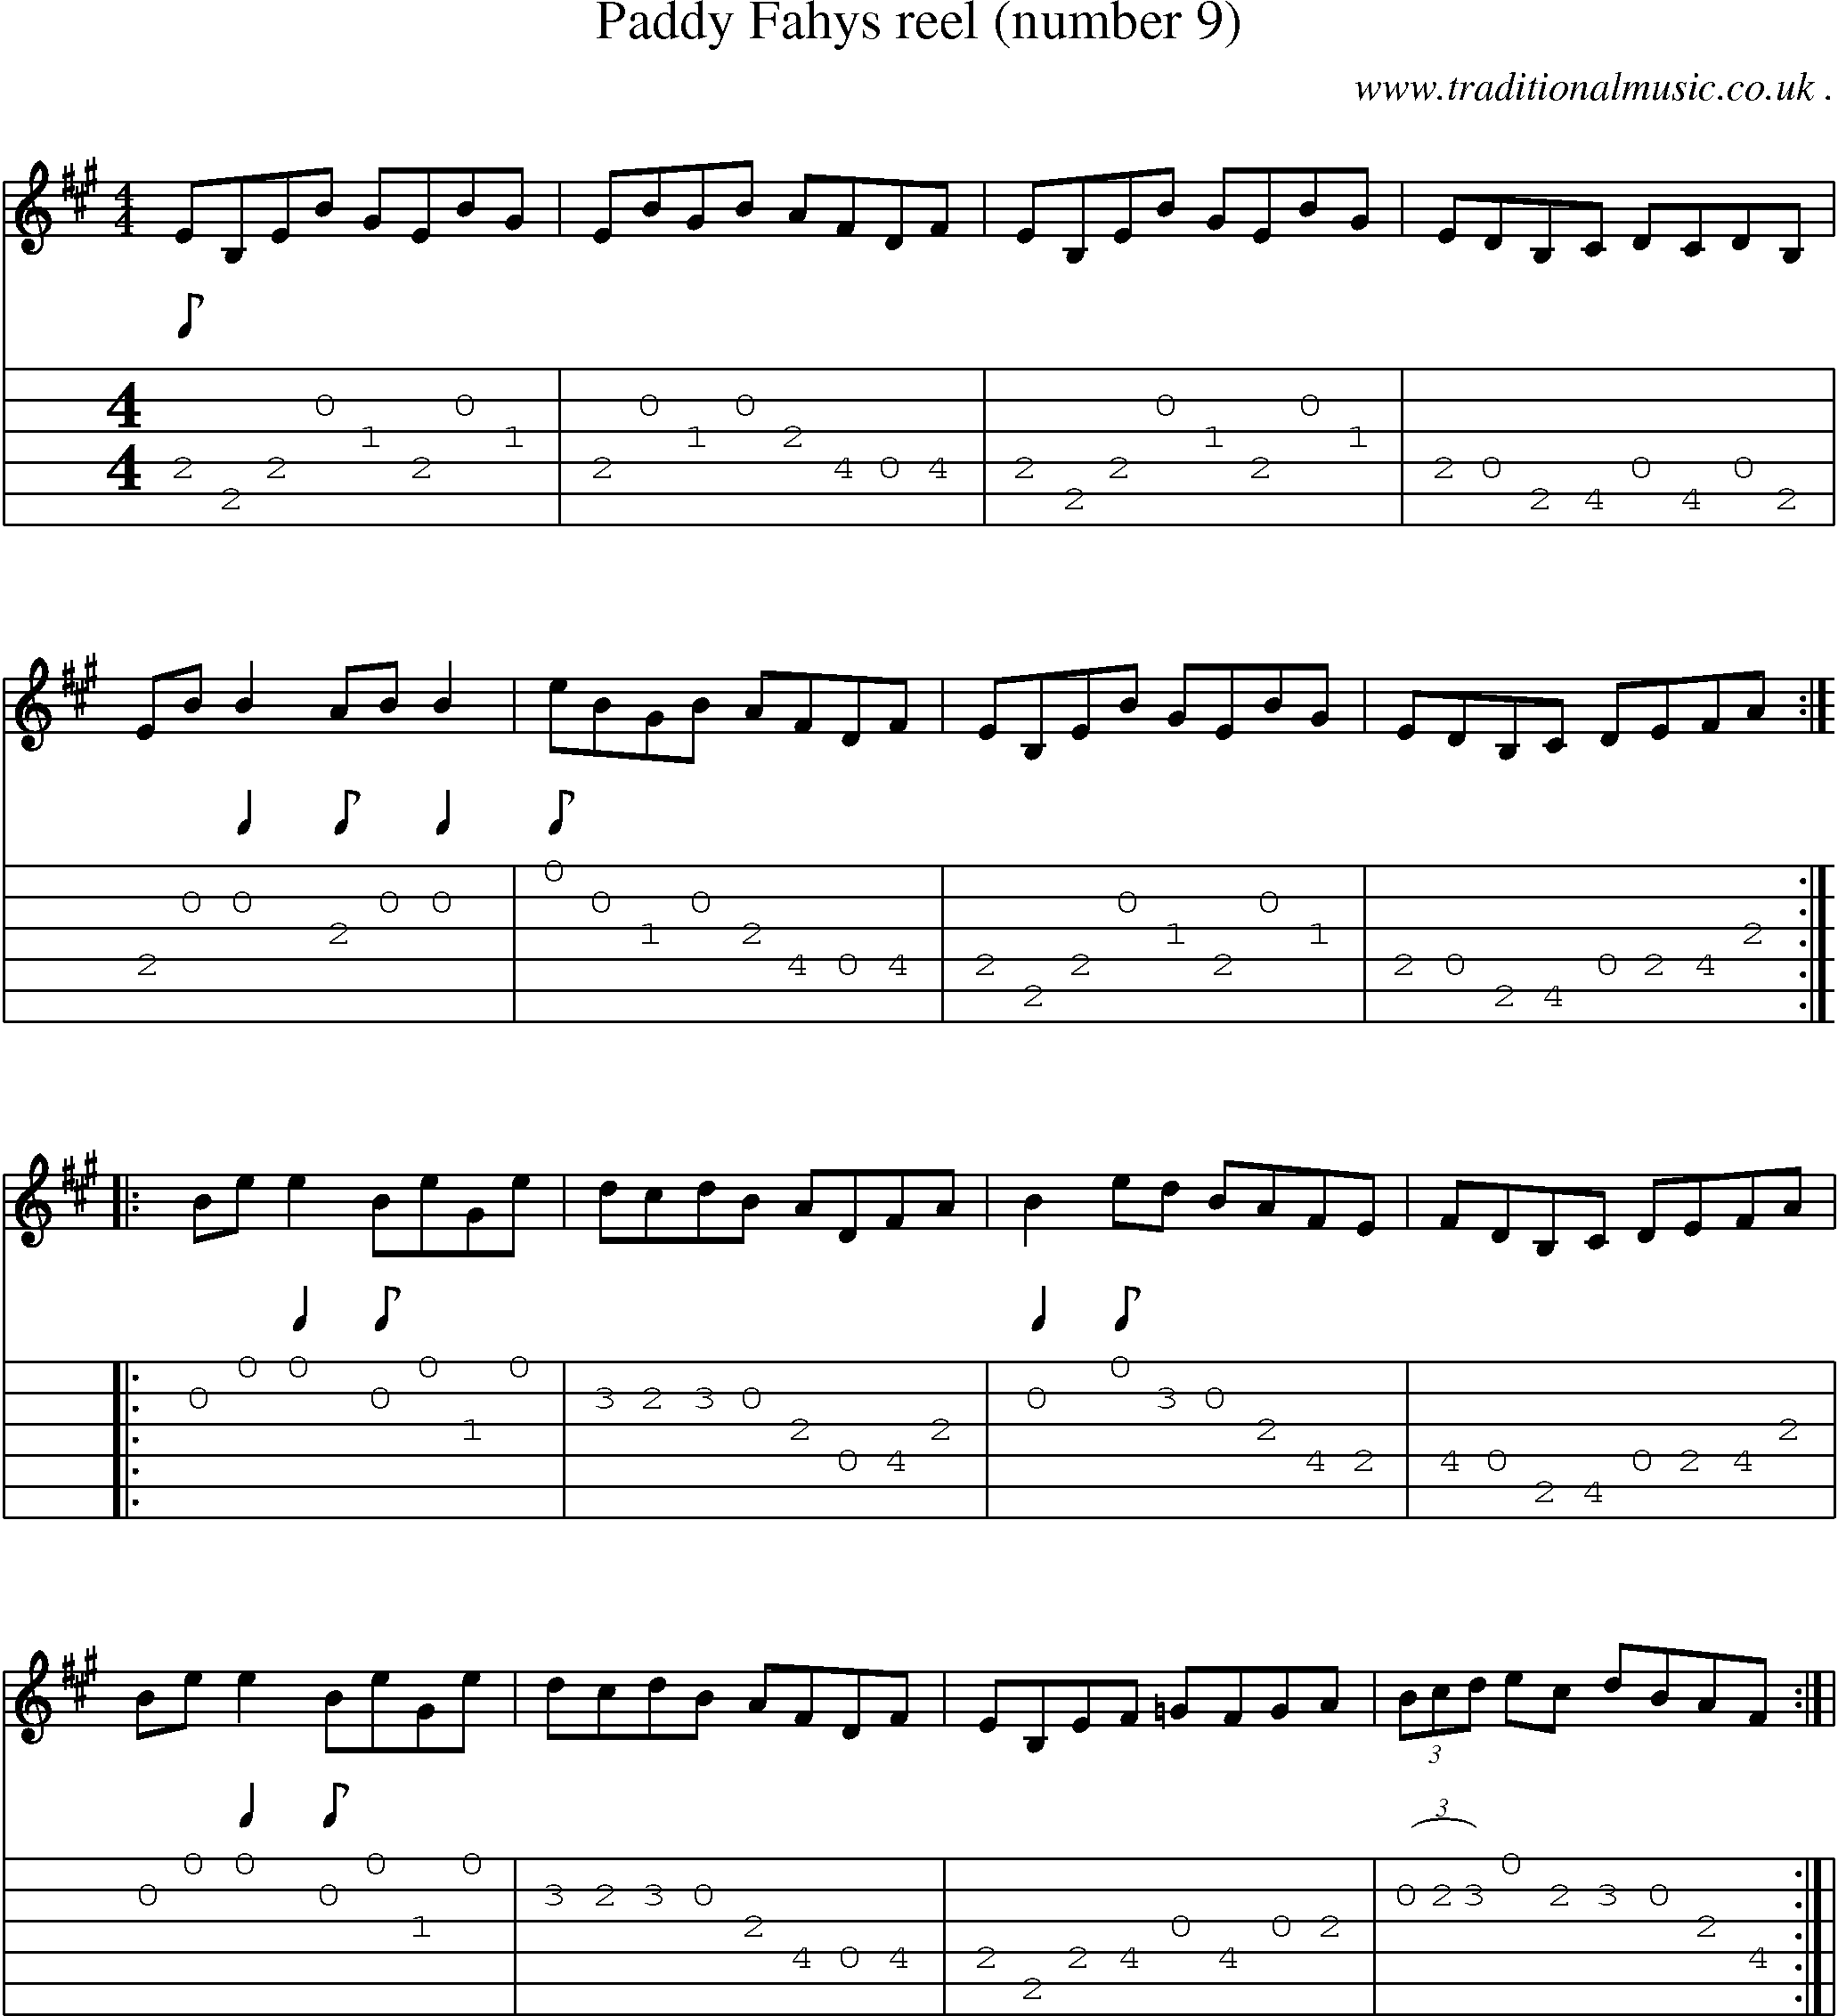 Sheet-Music and Guitar Tabs for Paddy Fahys Reel (number 9)